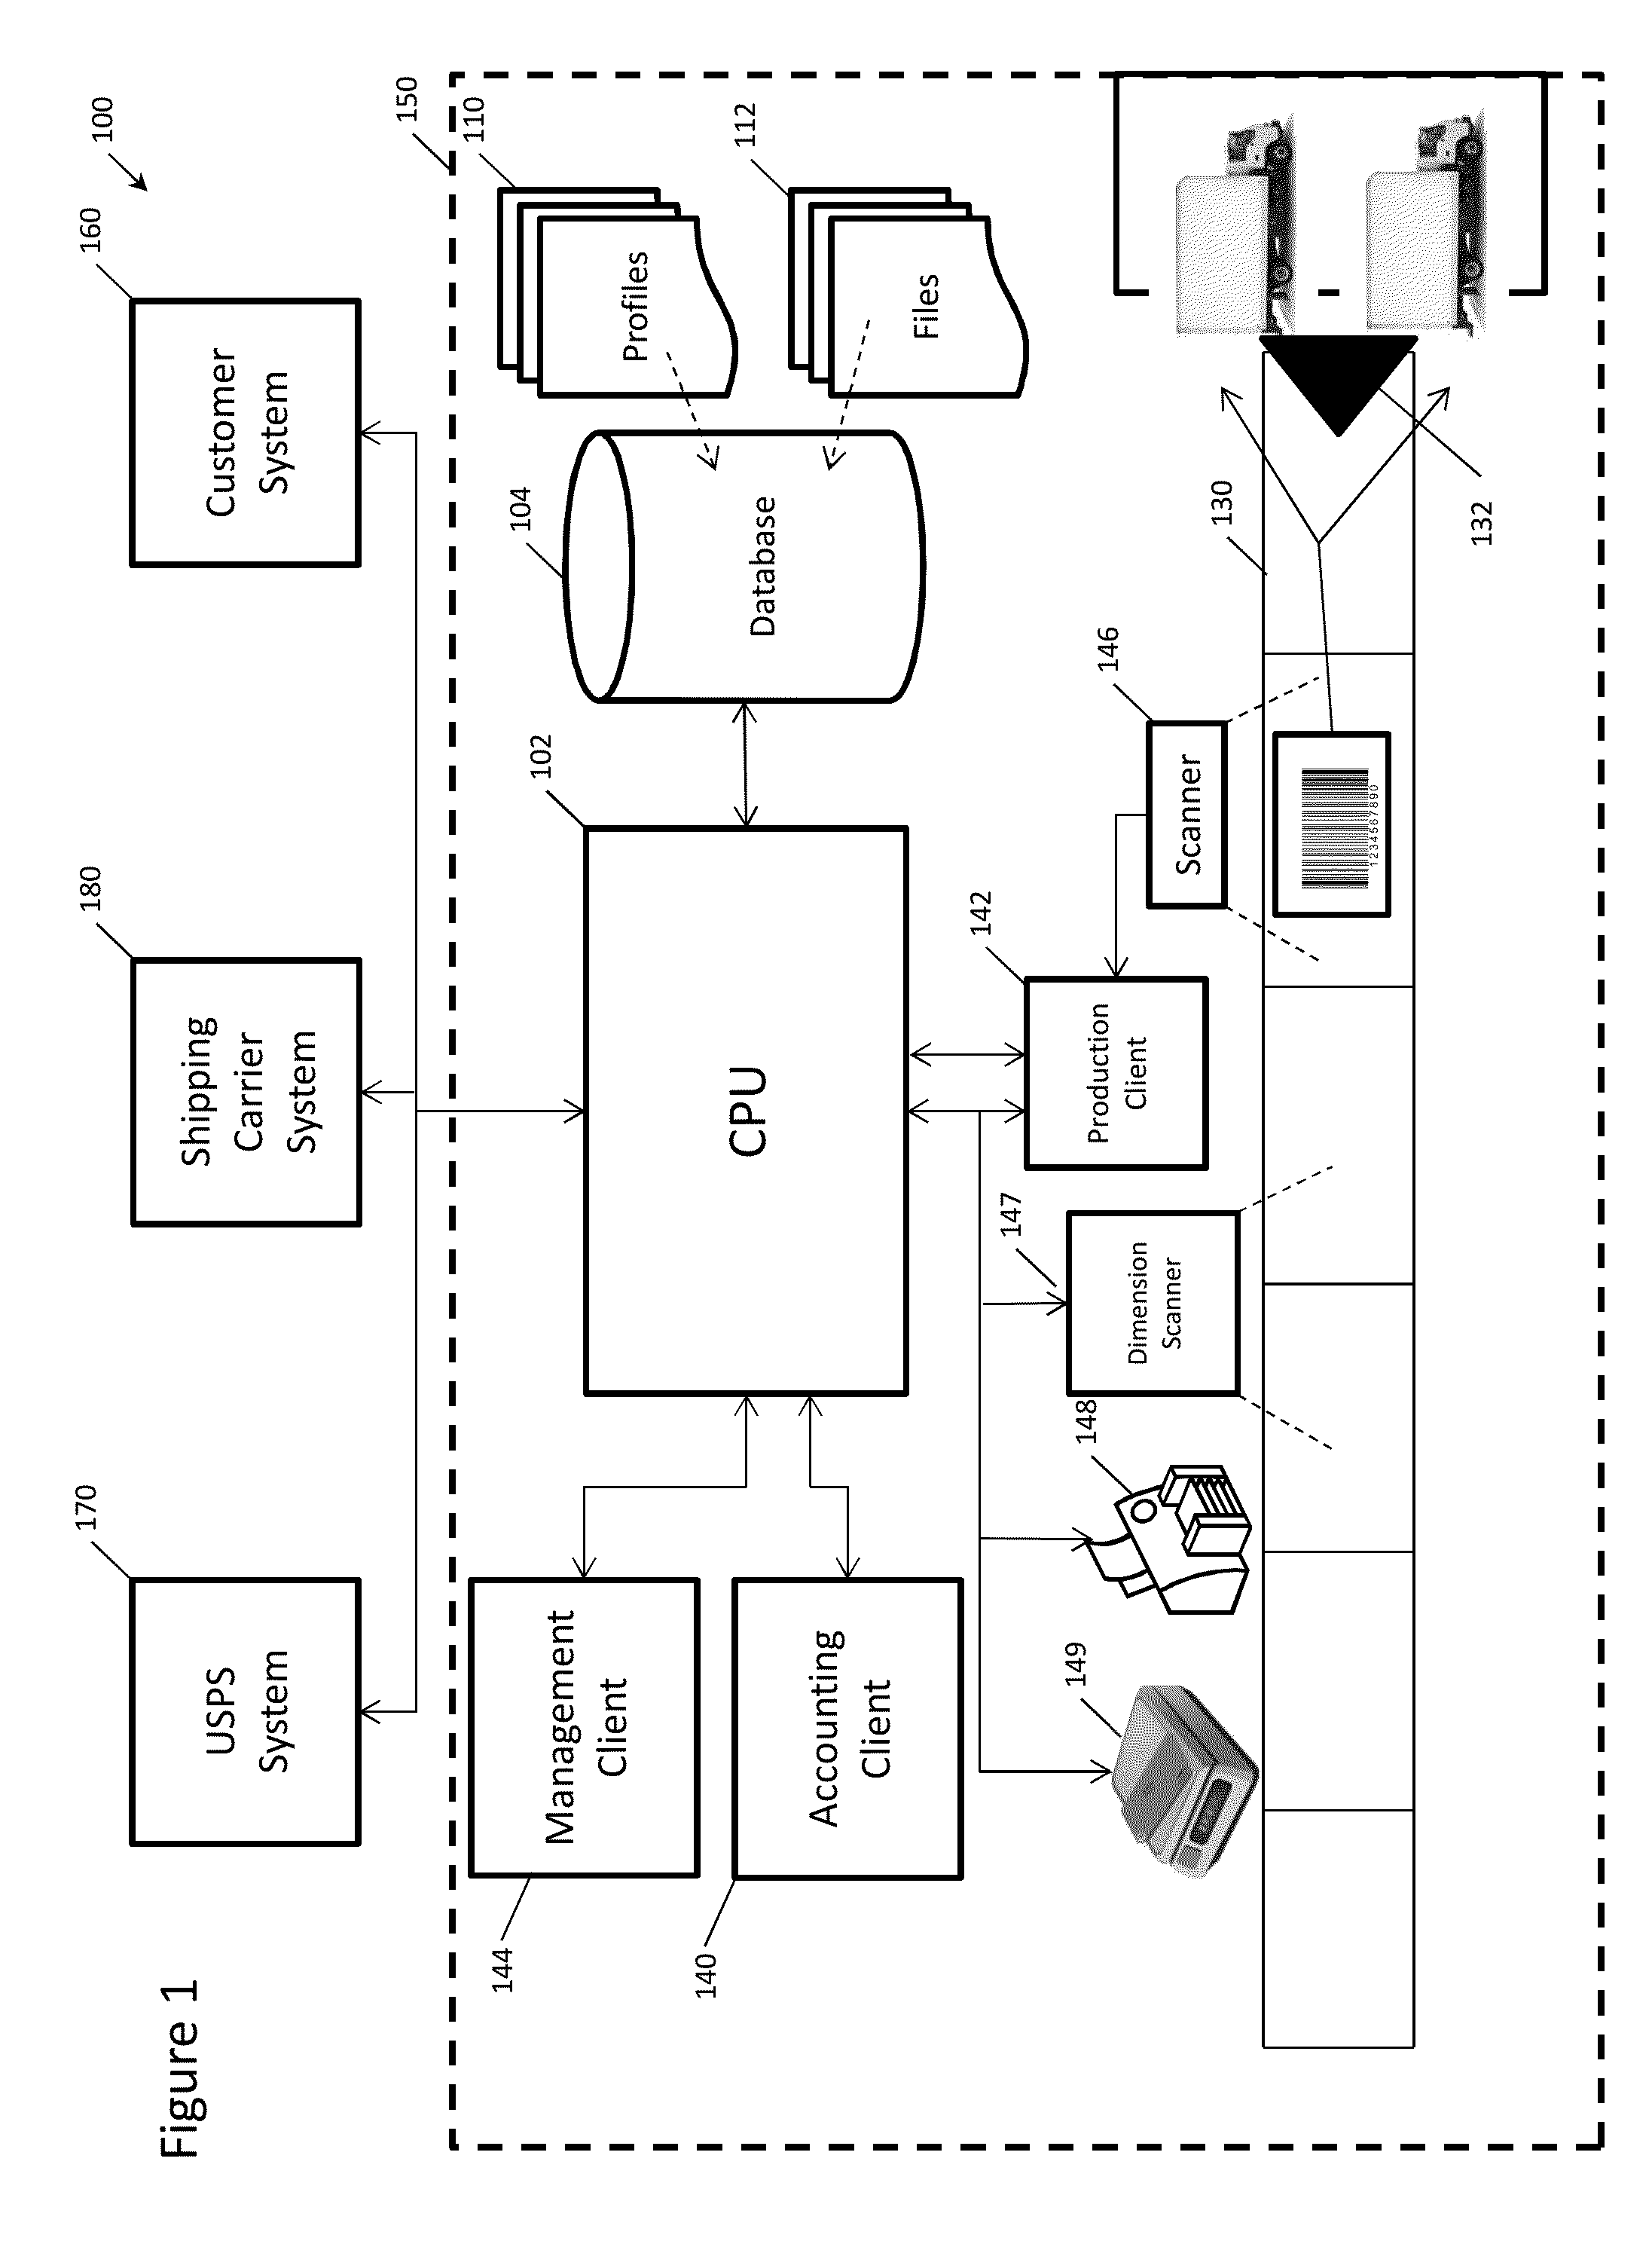 Parcel Processing System and Method